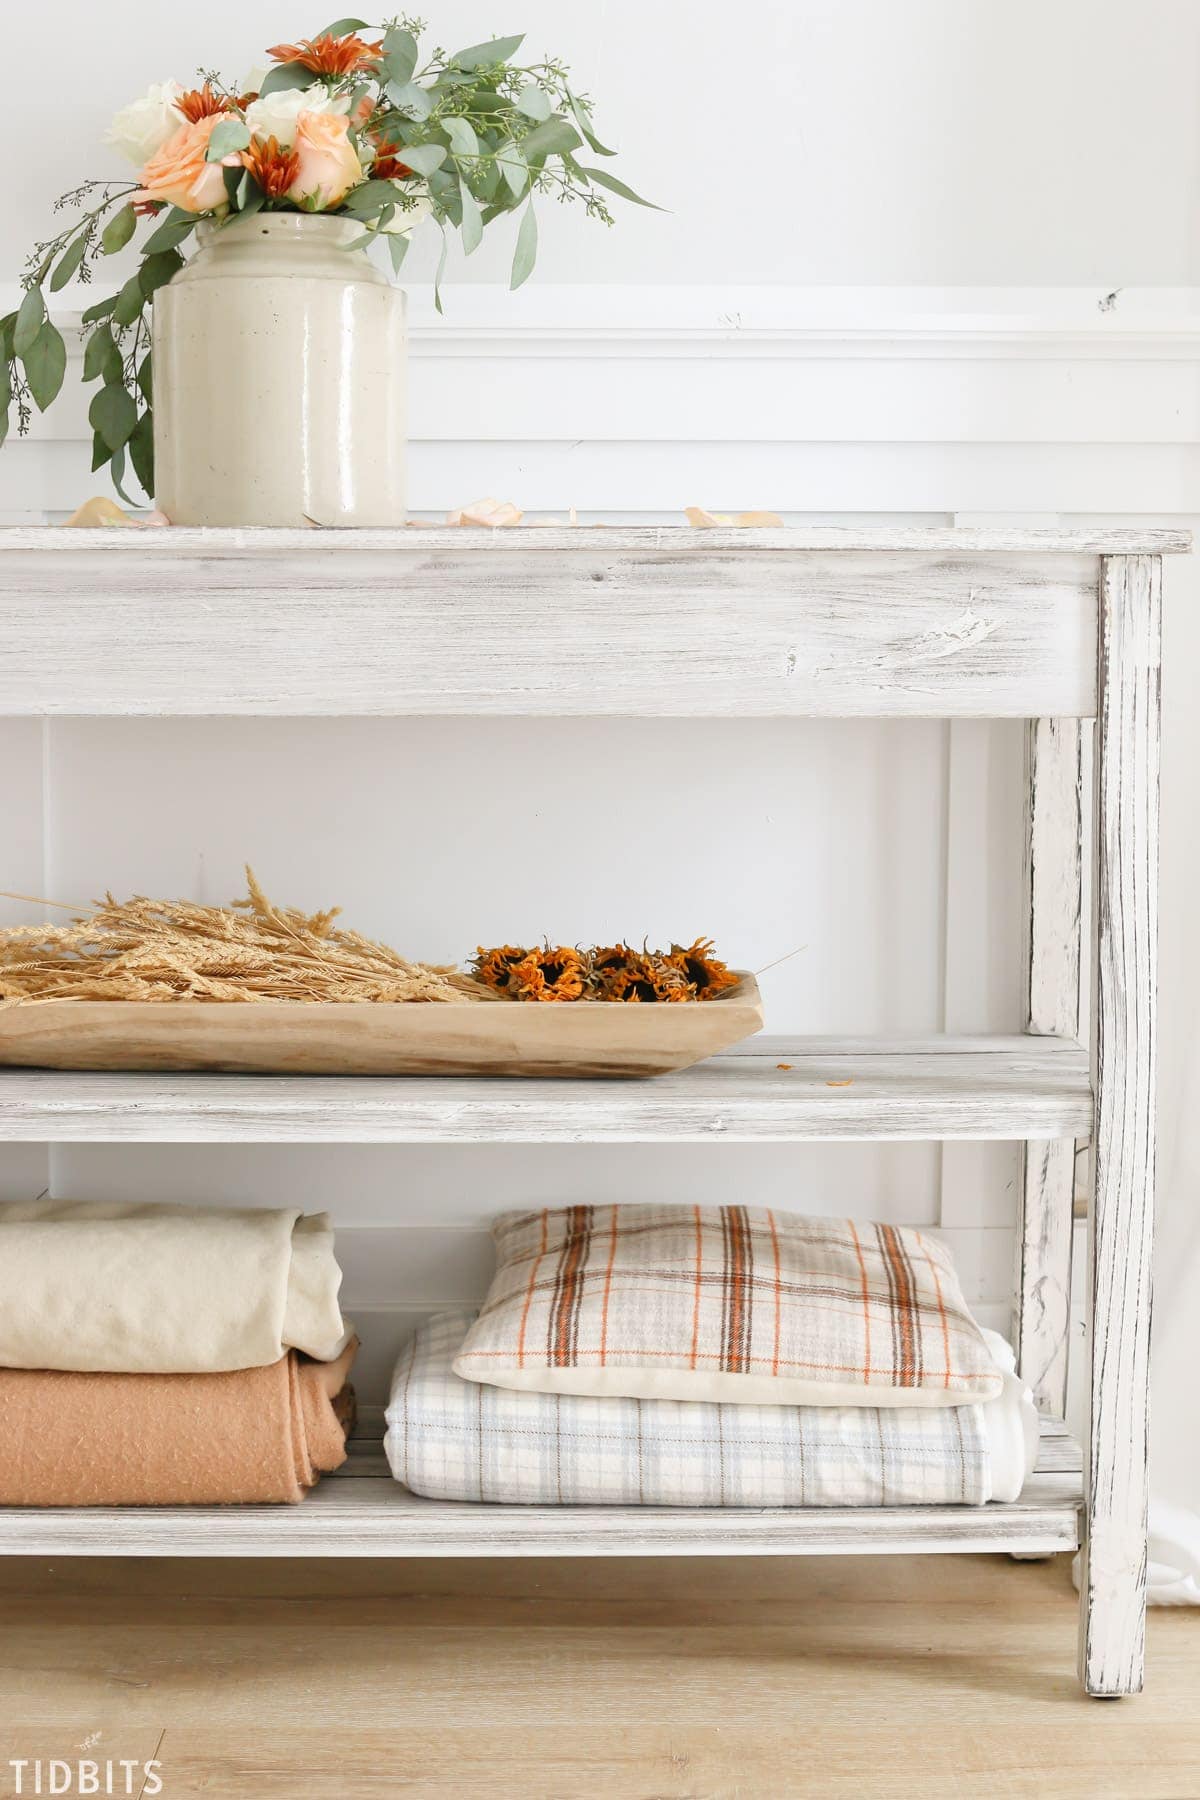 TIDBITS Fall Home Tour | Living Room. What small seasonal changes you can do when you don't feel like decorating.